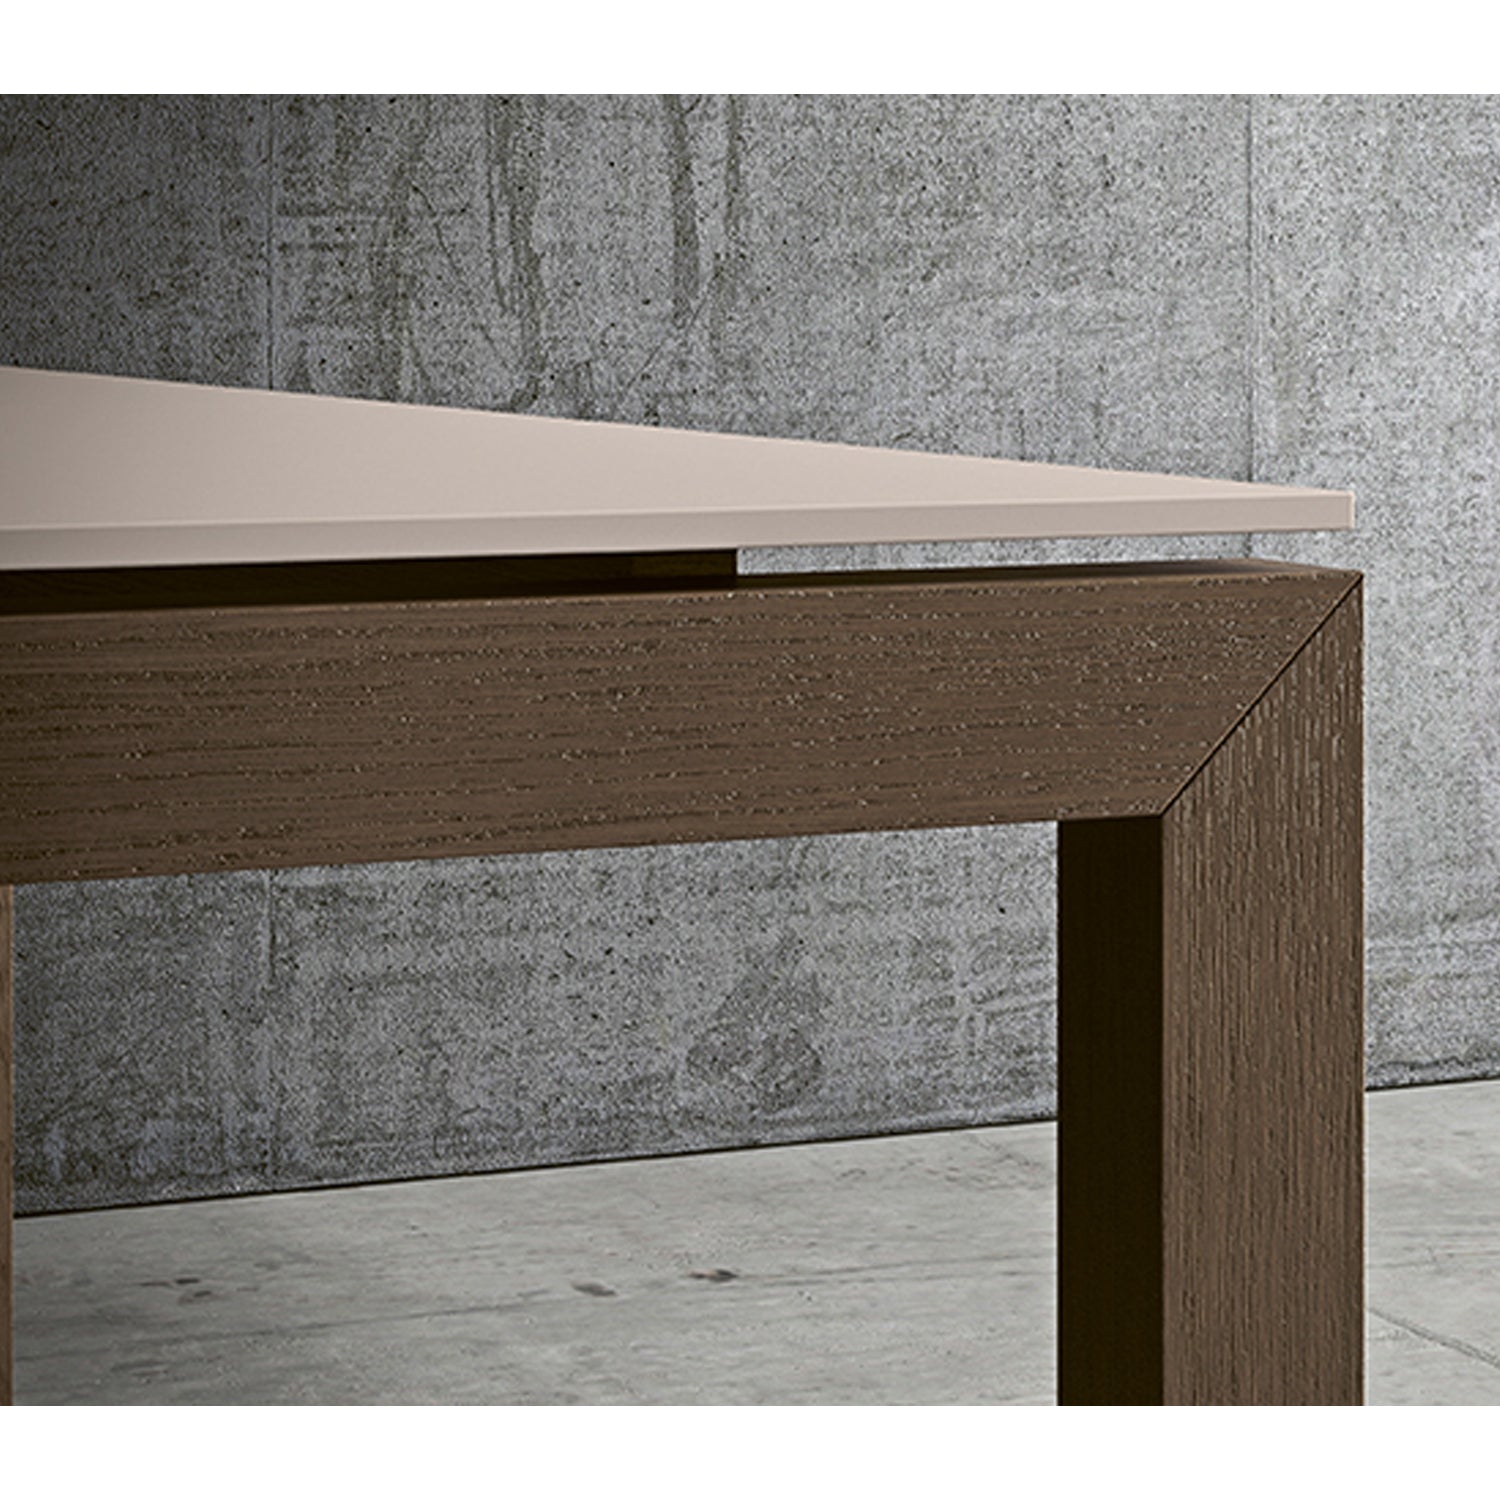 Etoile Extending Dining Table by Imperial Line